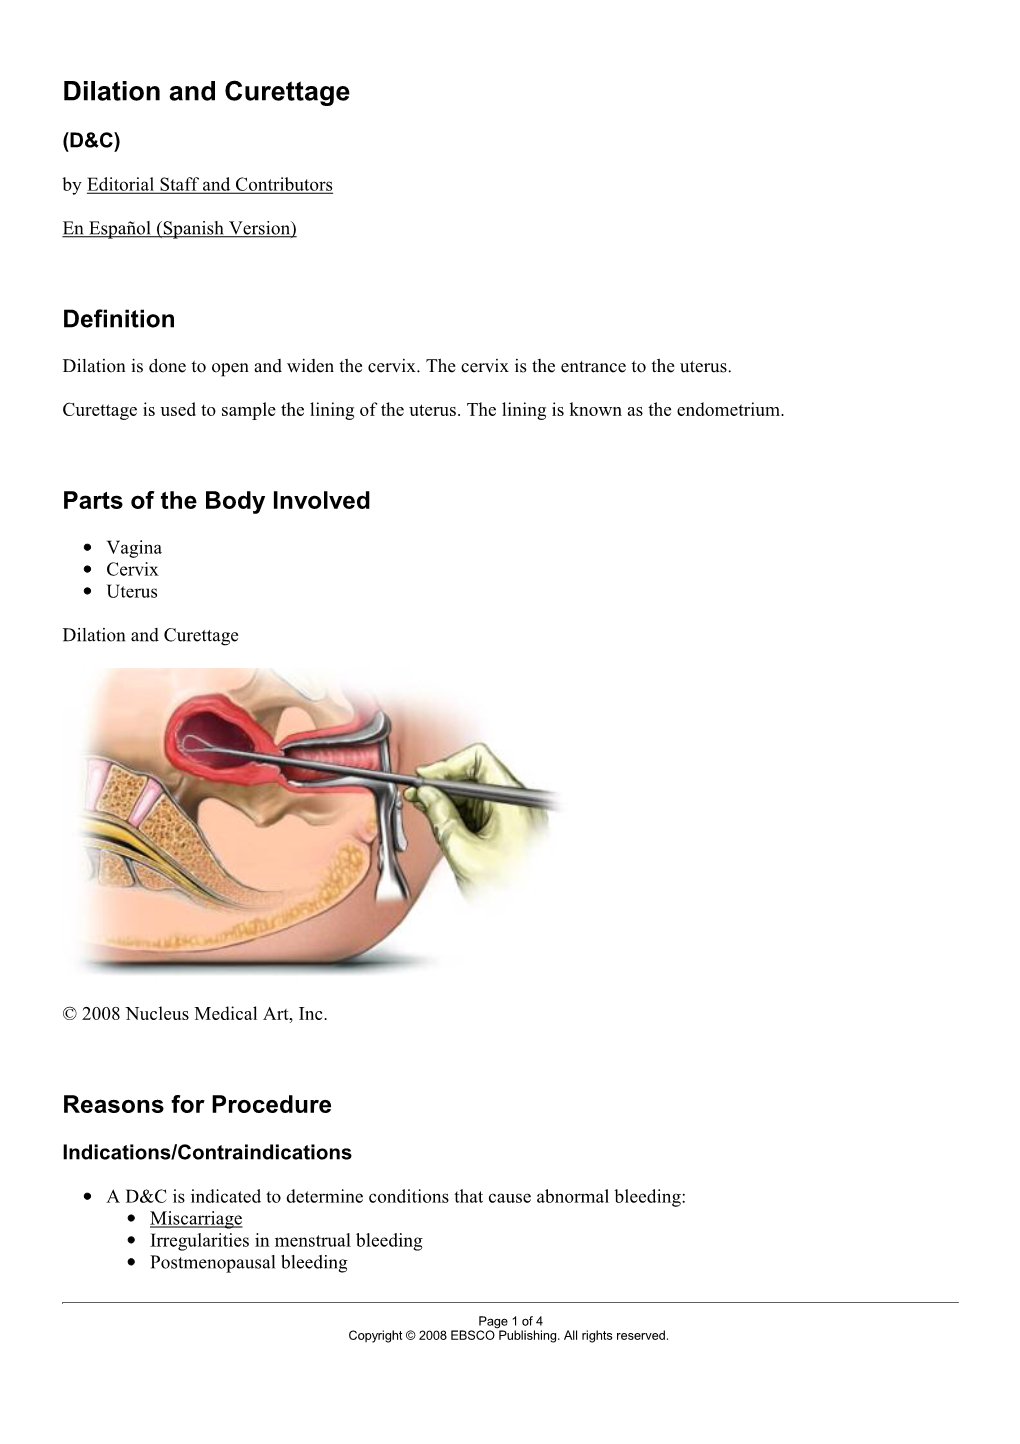 Dilation and Curettage